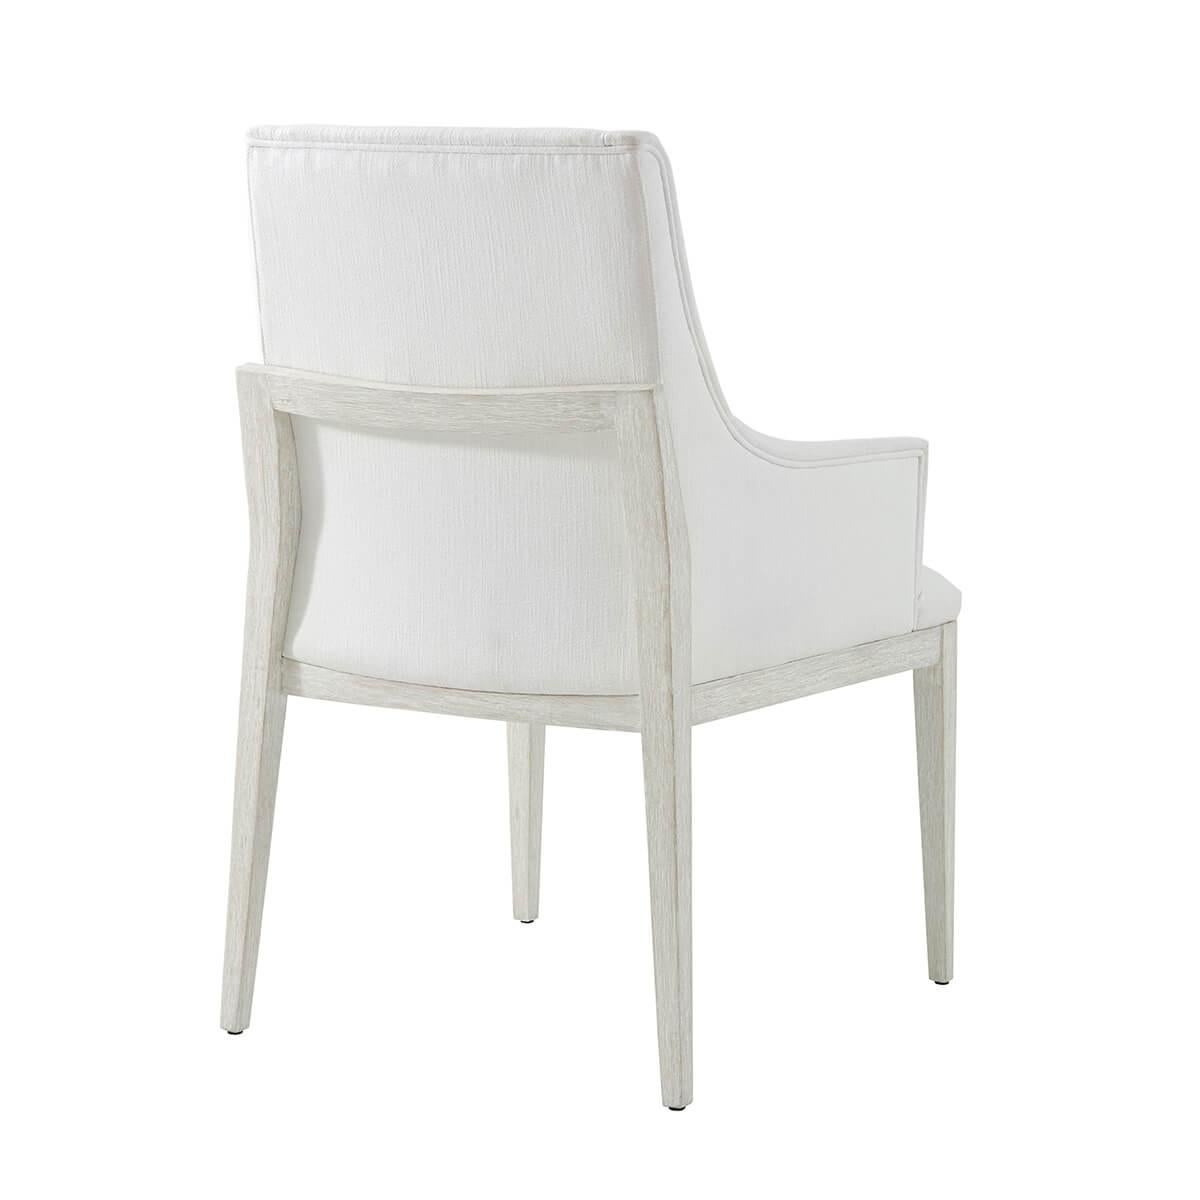 In our Sea Salt finish, the upholstered arm chair displays a comfortable upholstered seat with a fully upholstered back and arms. Raised on square tapered legs.

Dimensions: 23.5